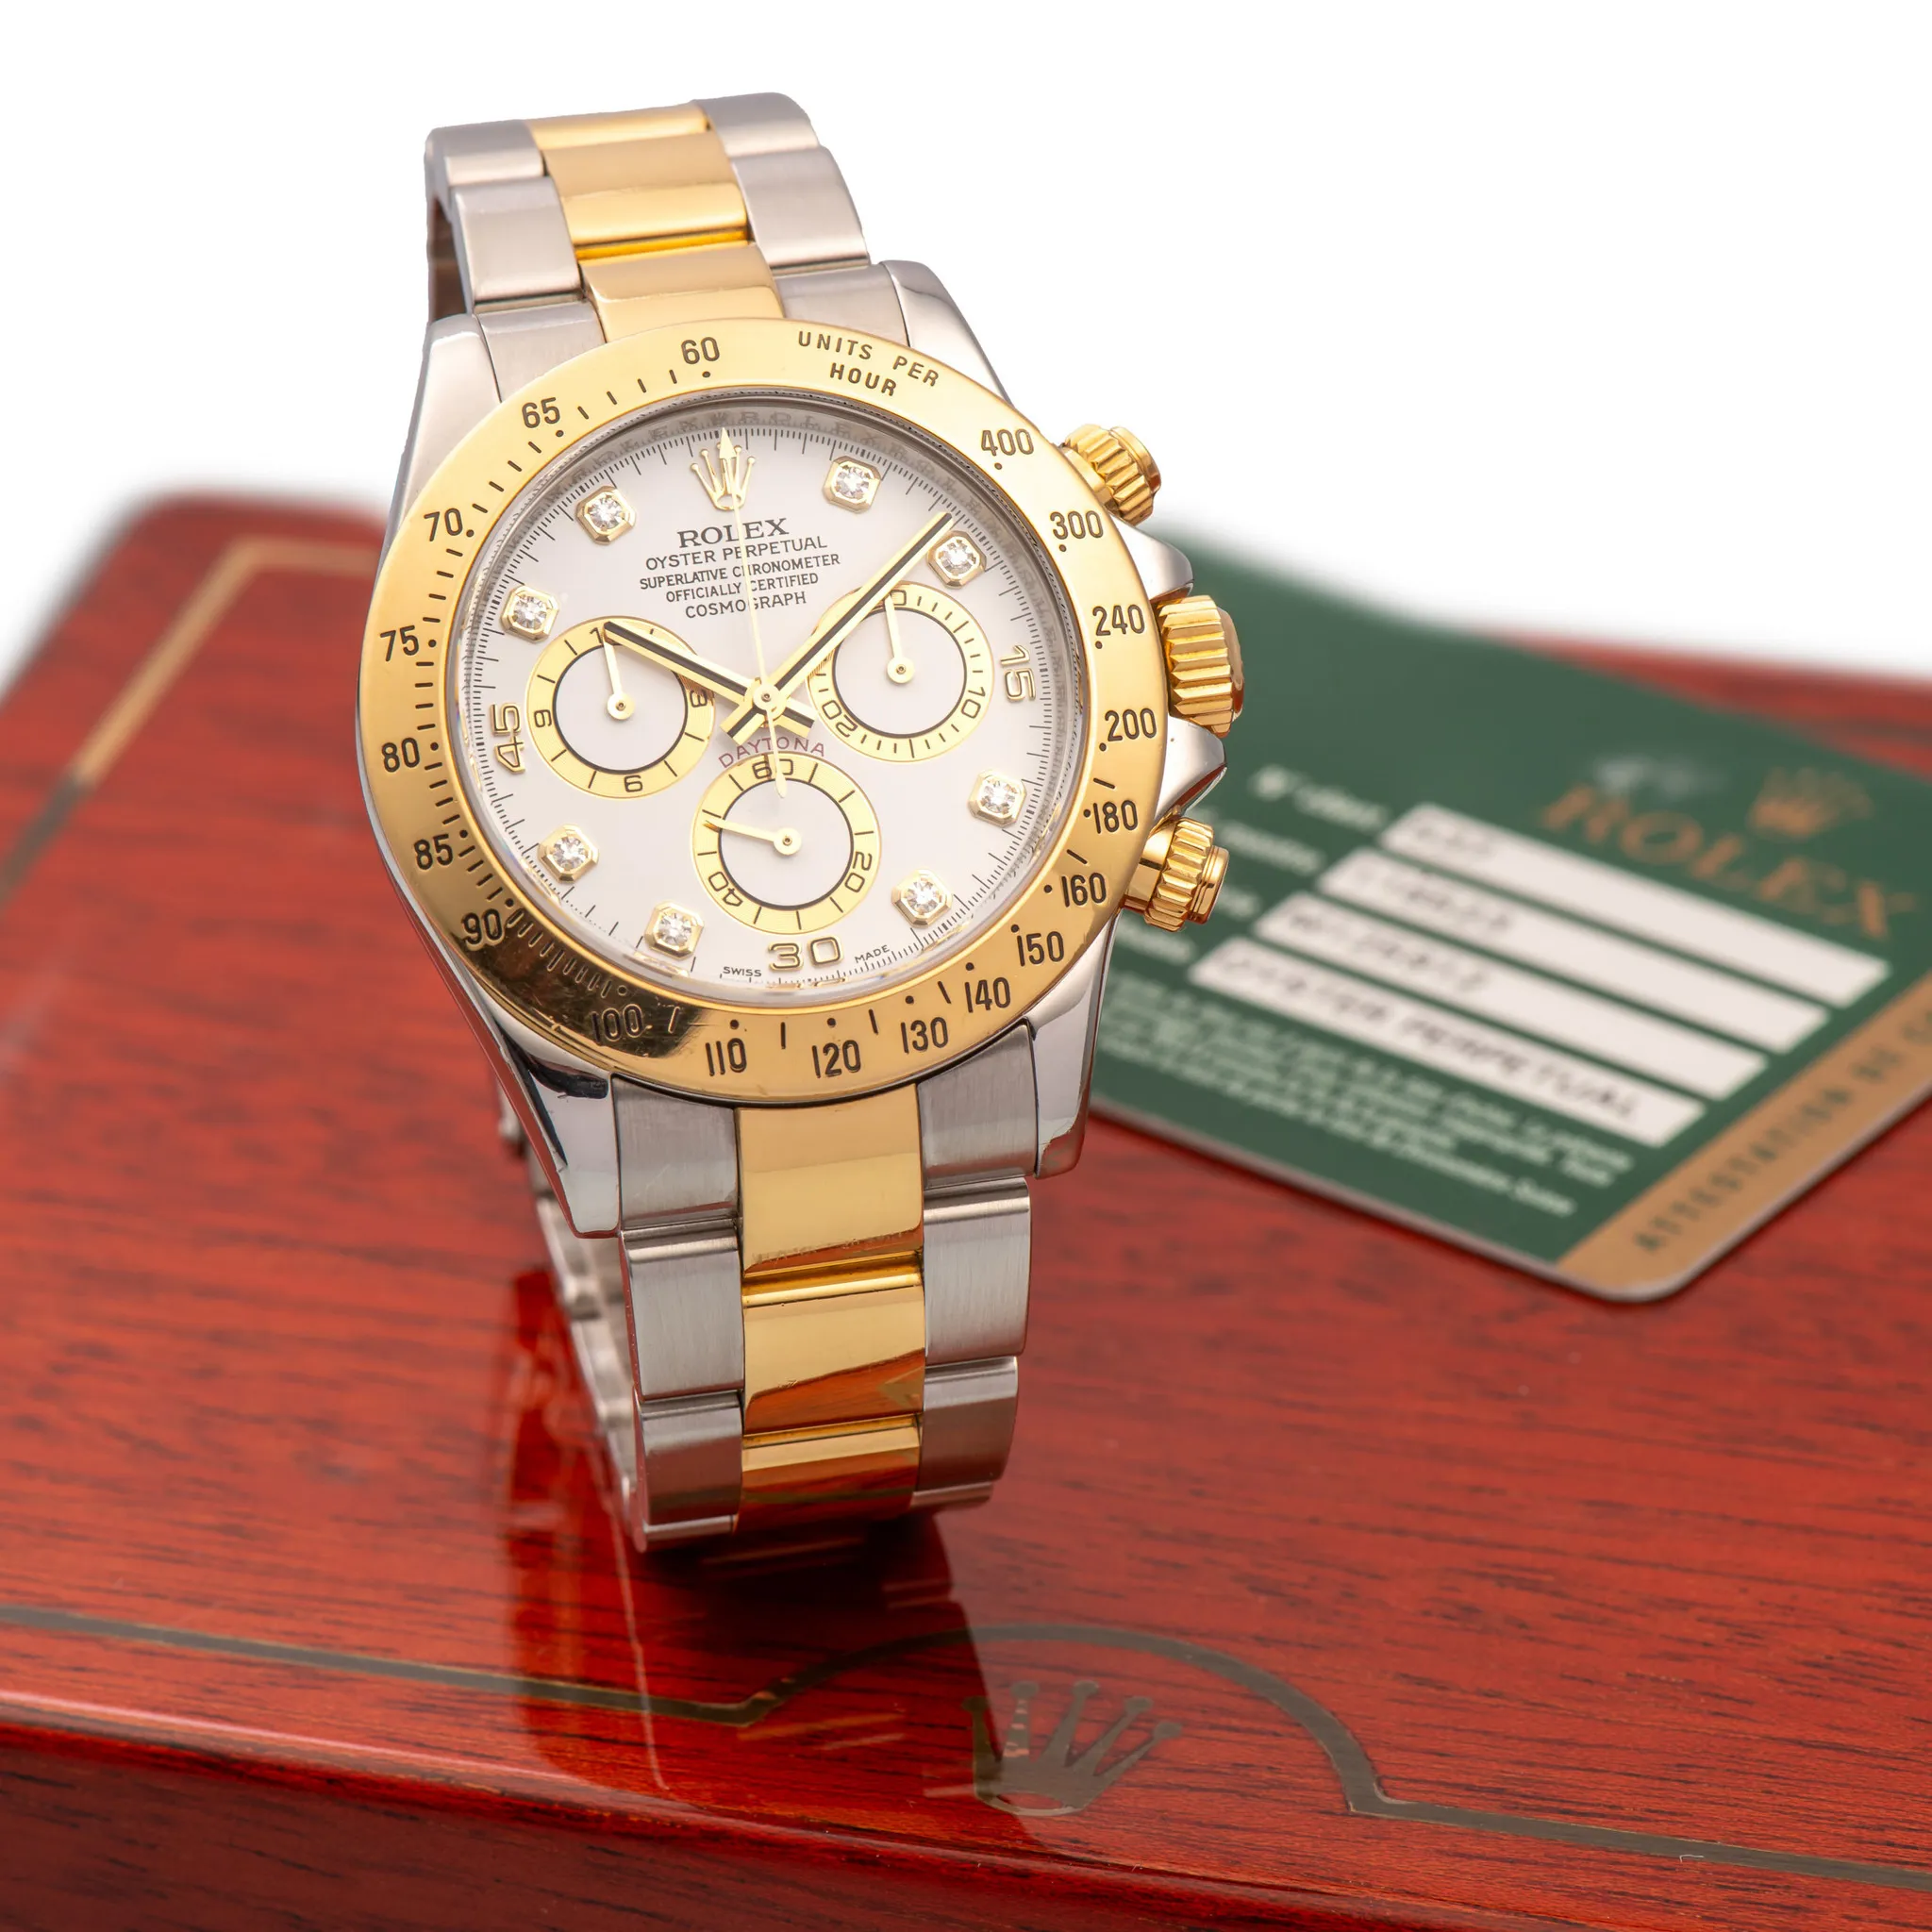 Rolex Daytona 116523 39mm Yellow gold and stainless steel White